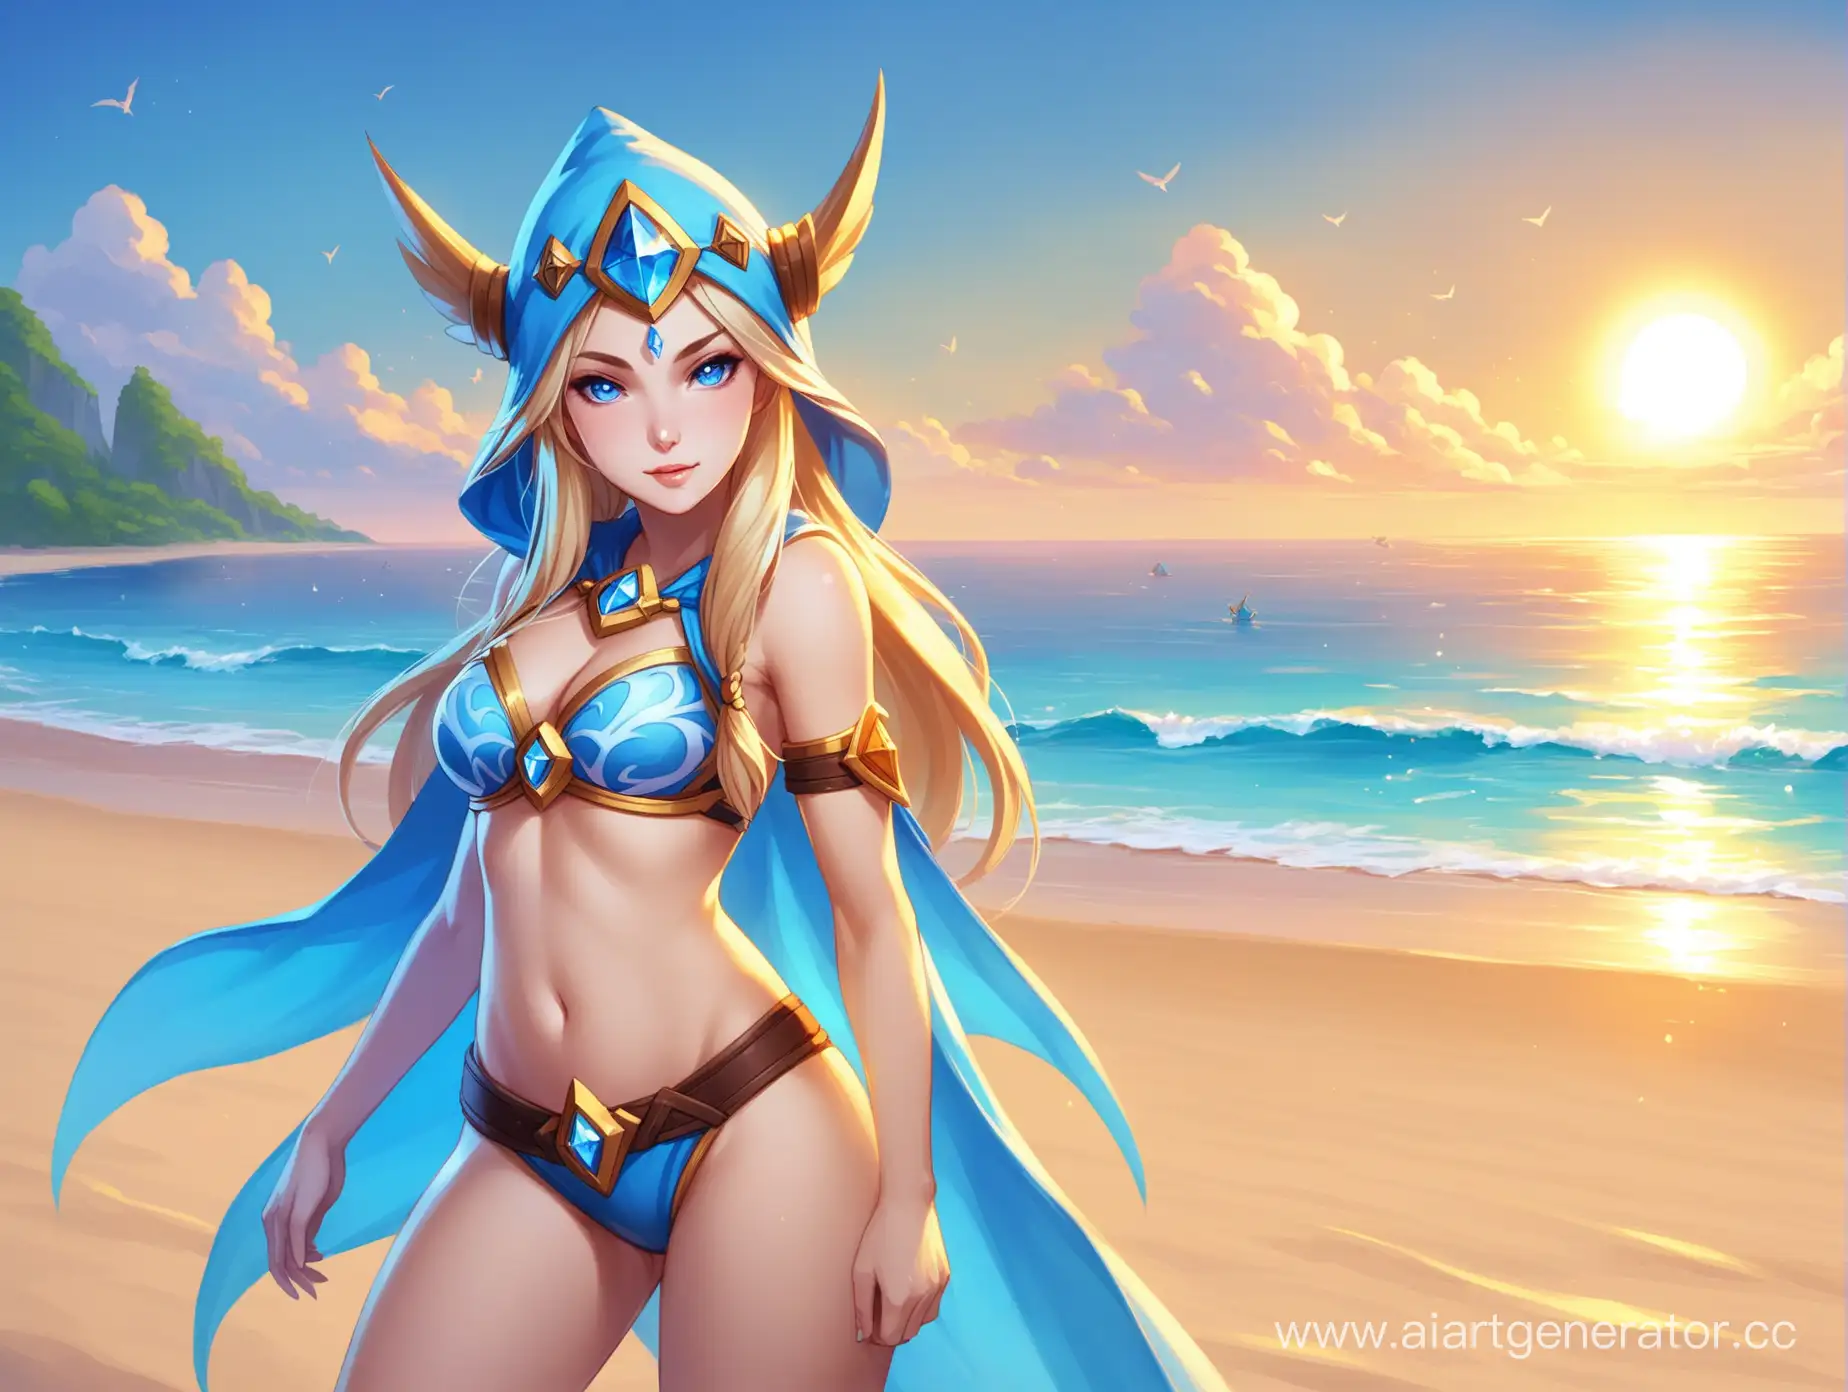 Crystal Maiden a hero from dota 2 chils on the beach